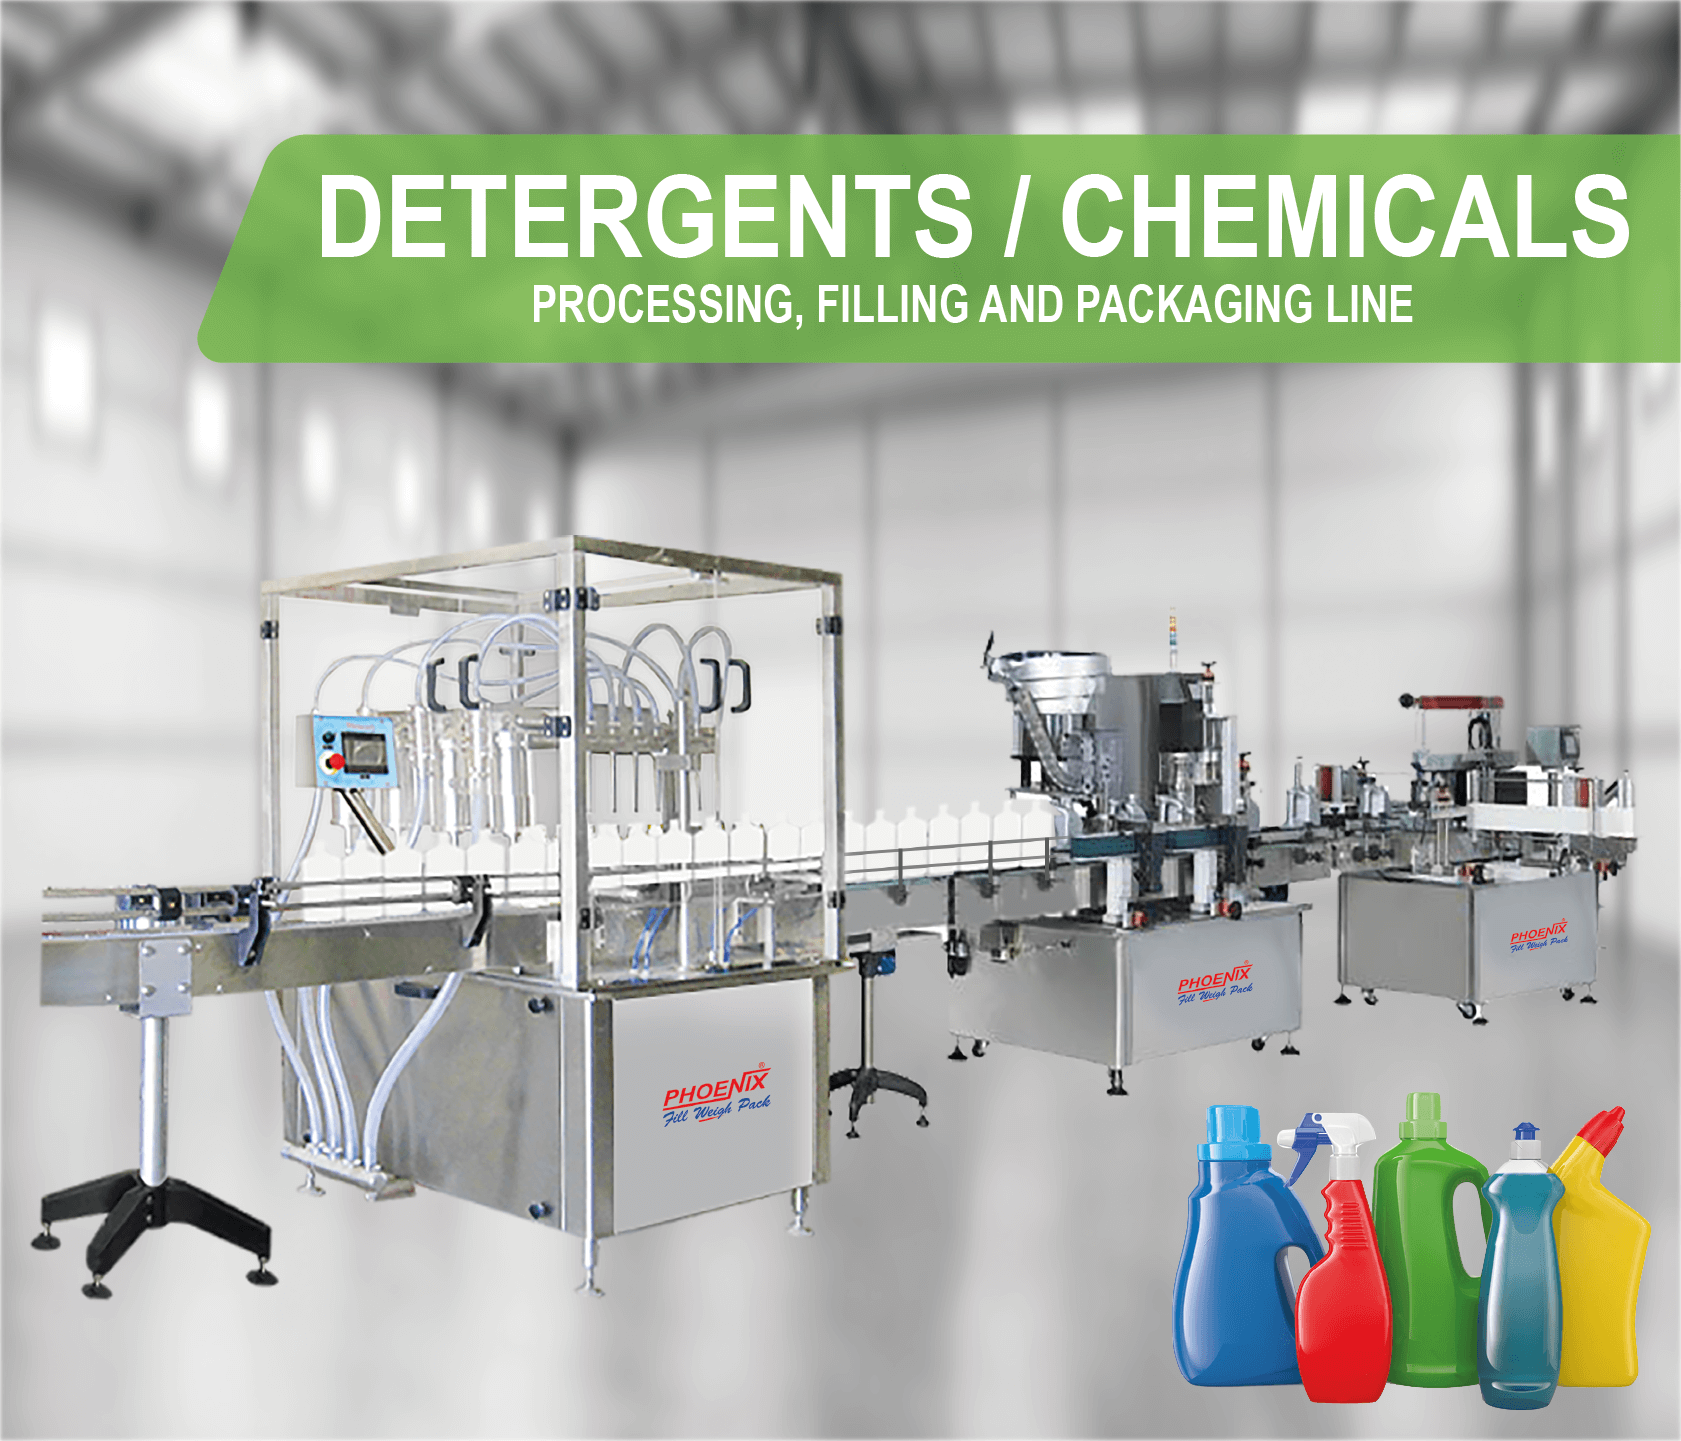 Detergents/chemicals, Processing, Filling and Packaging Line